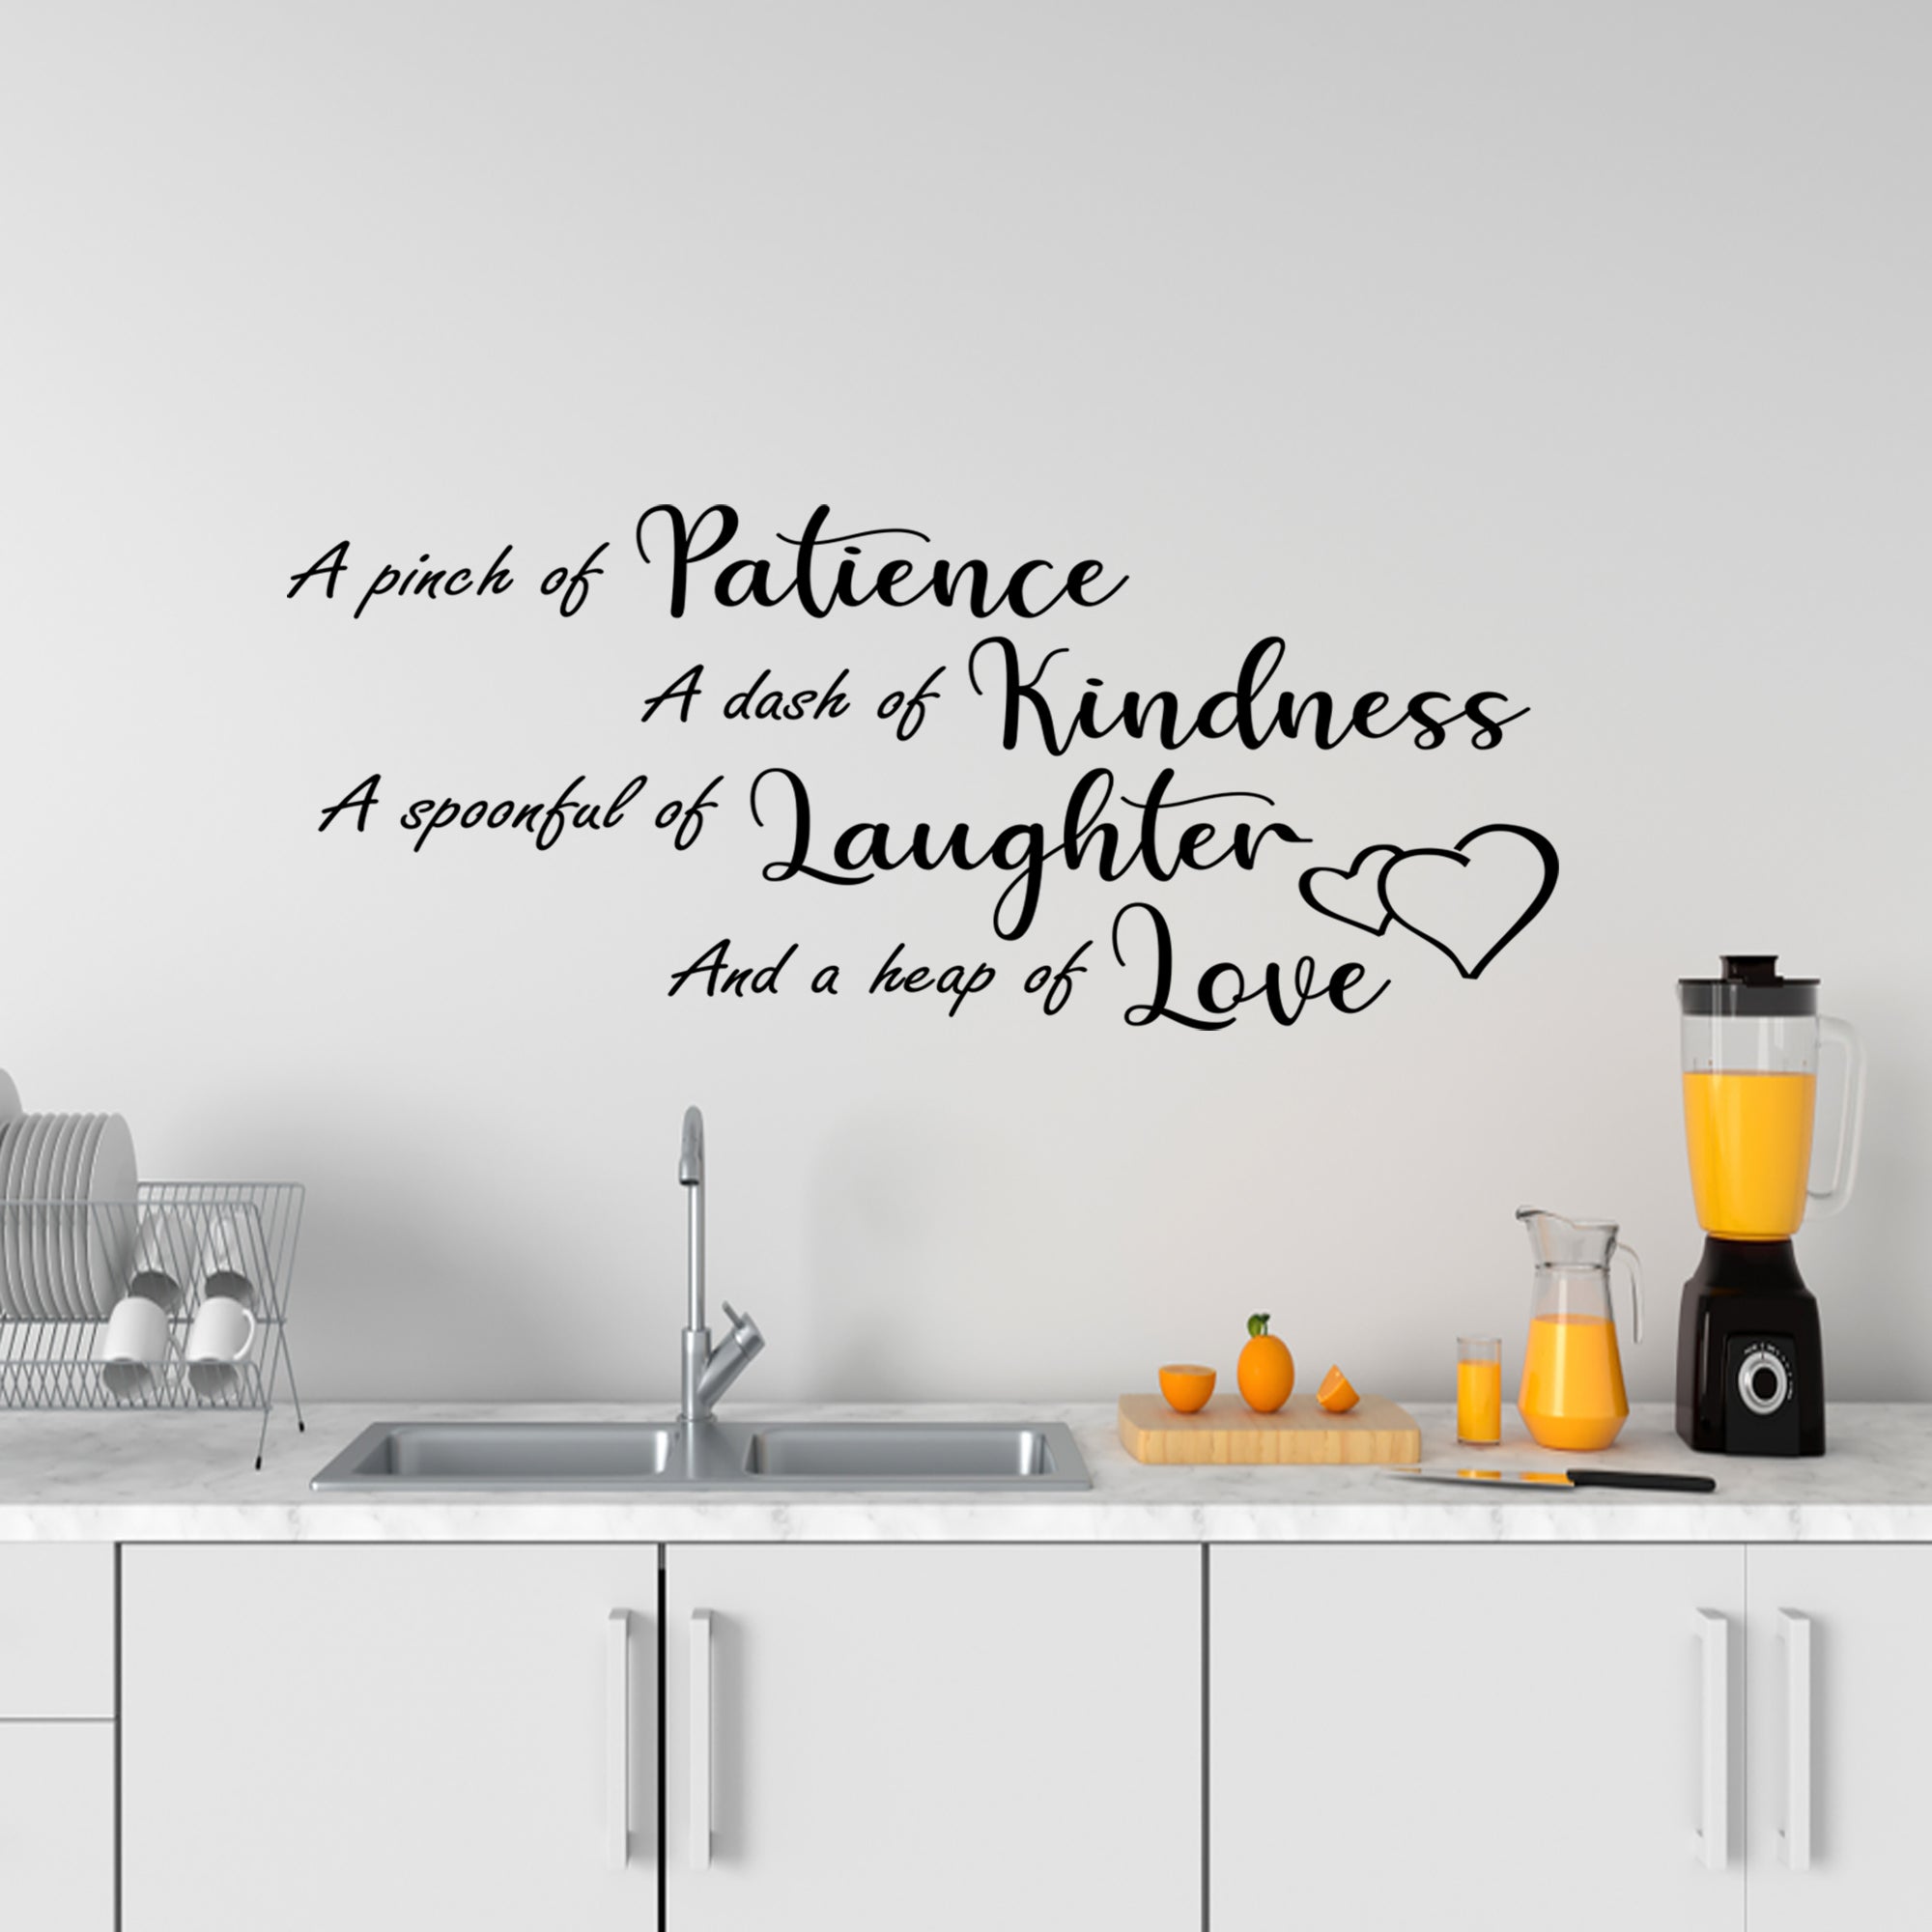 A Pinch Of Patience Sticker For Kitchen - Inspirational Wall